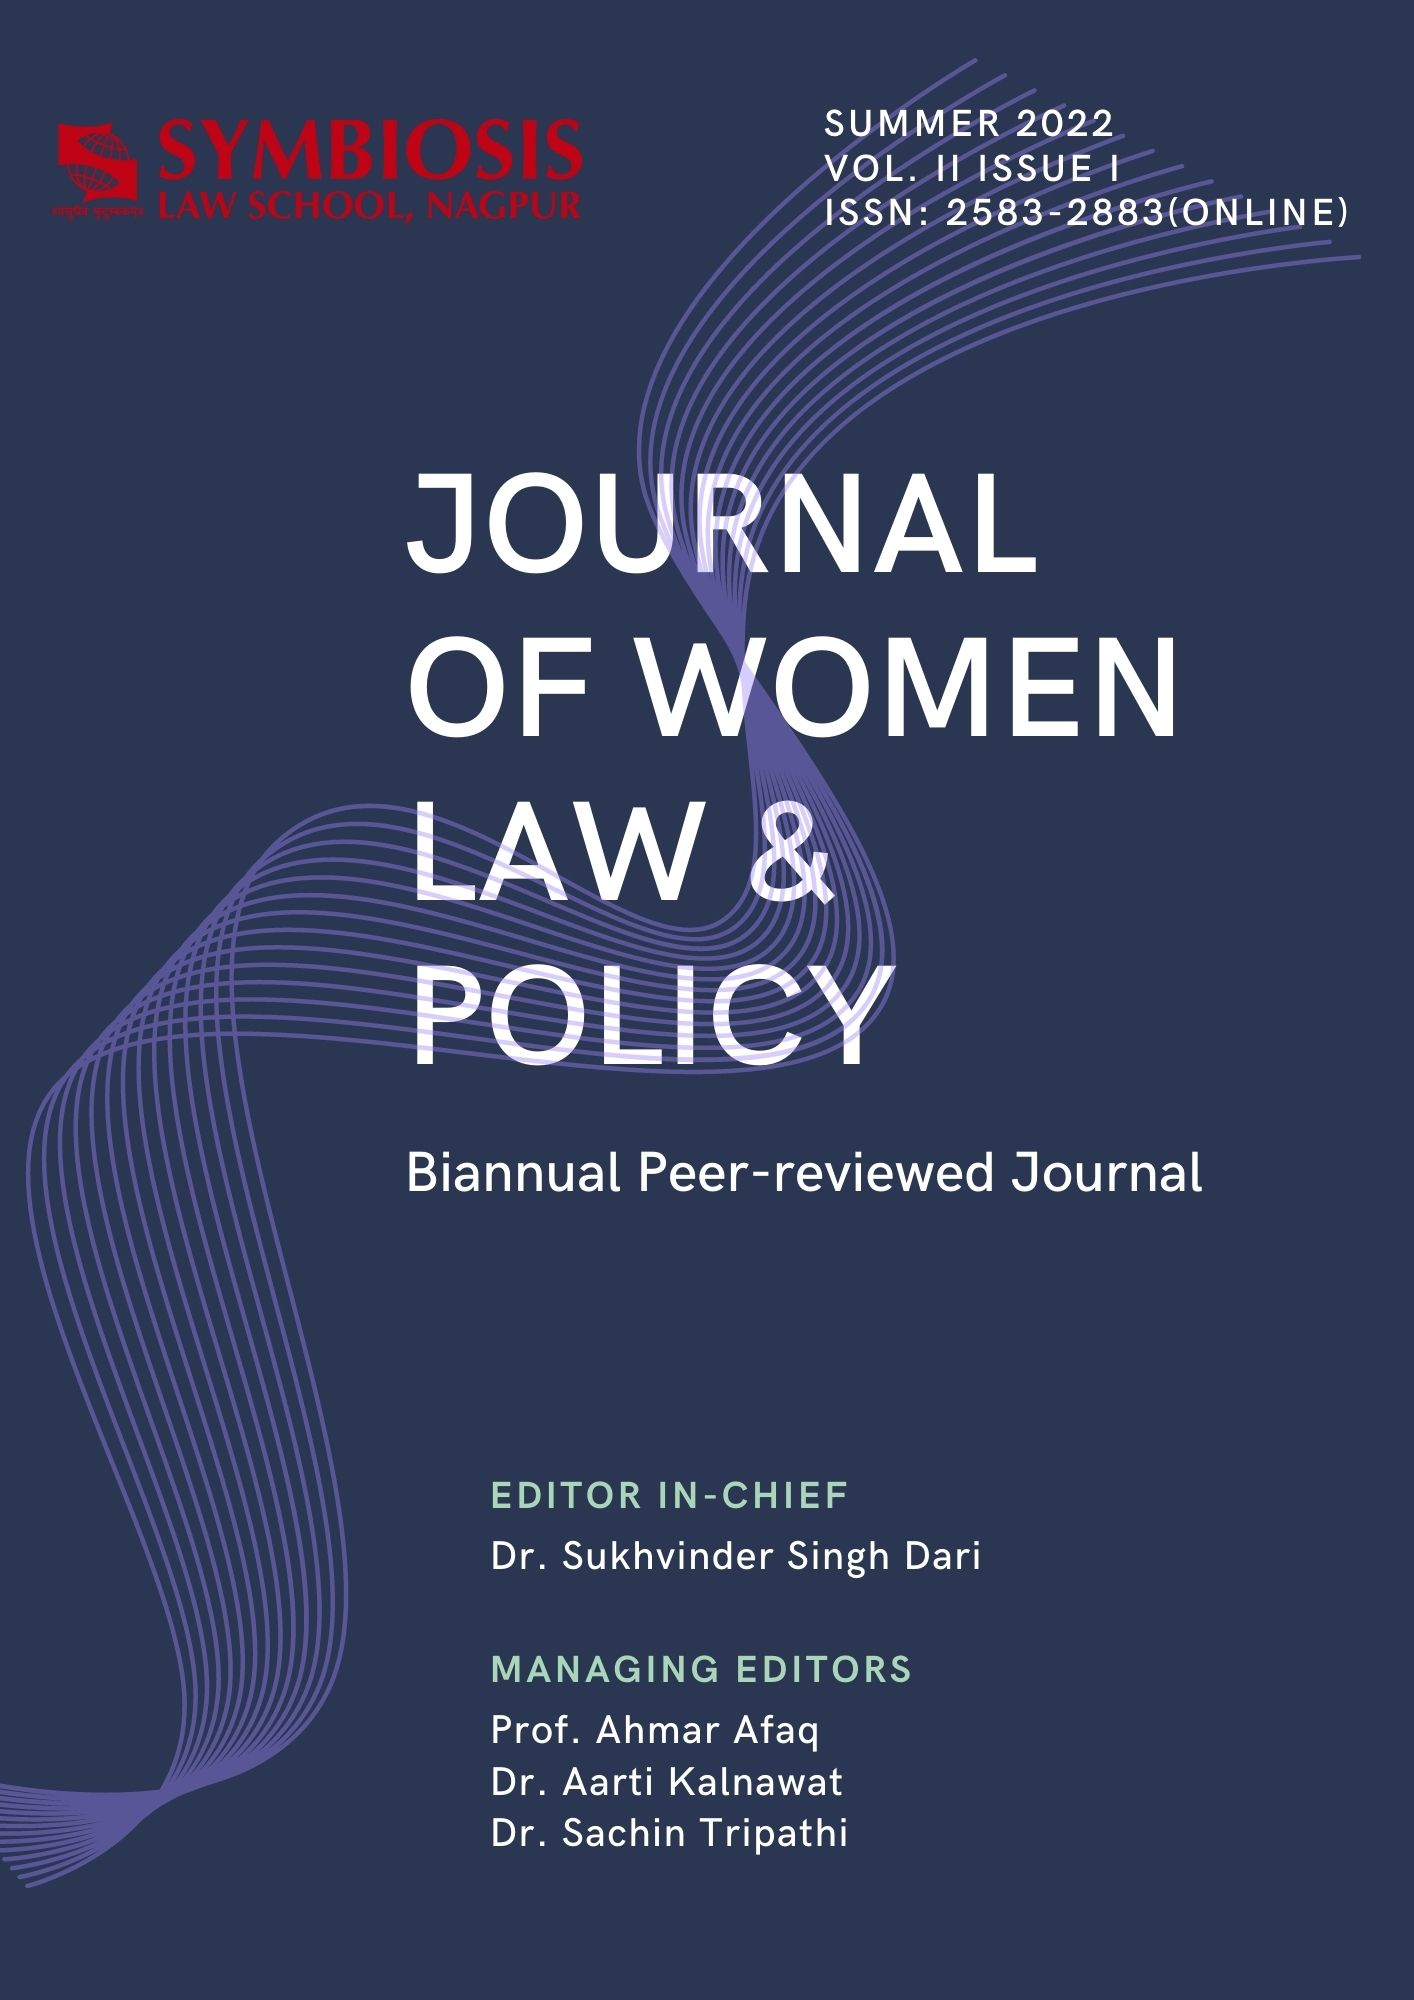 Journal of Women Law & Policy - SLS Nagpur